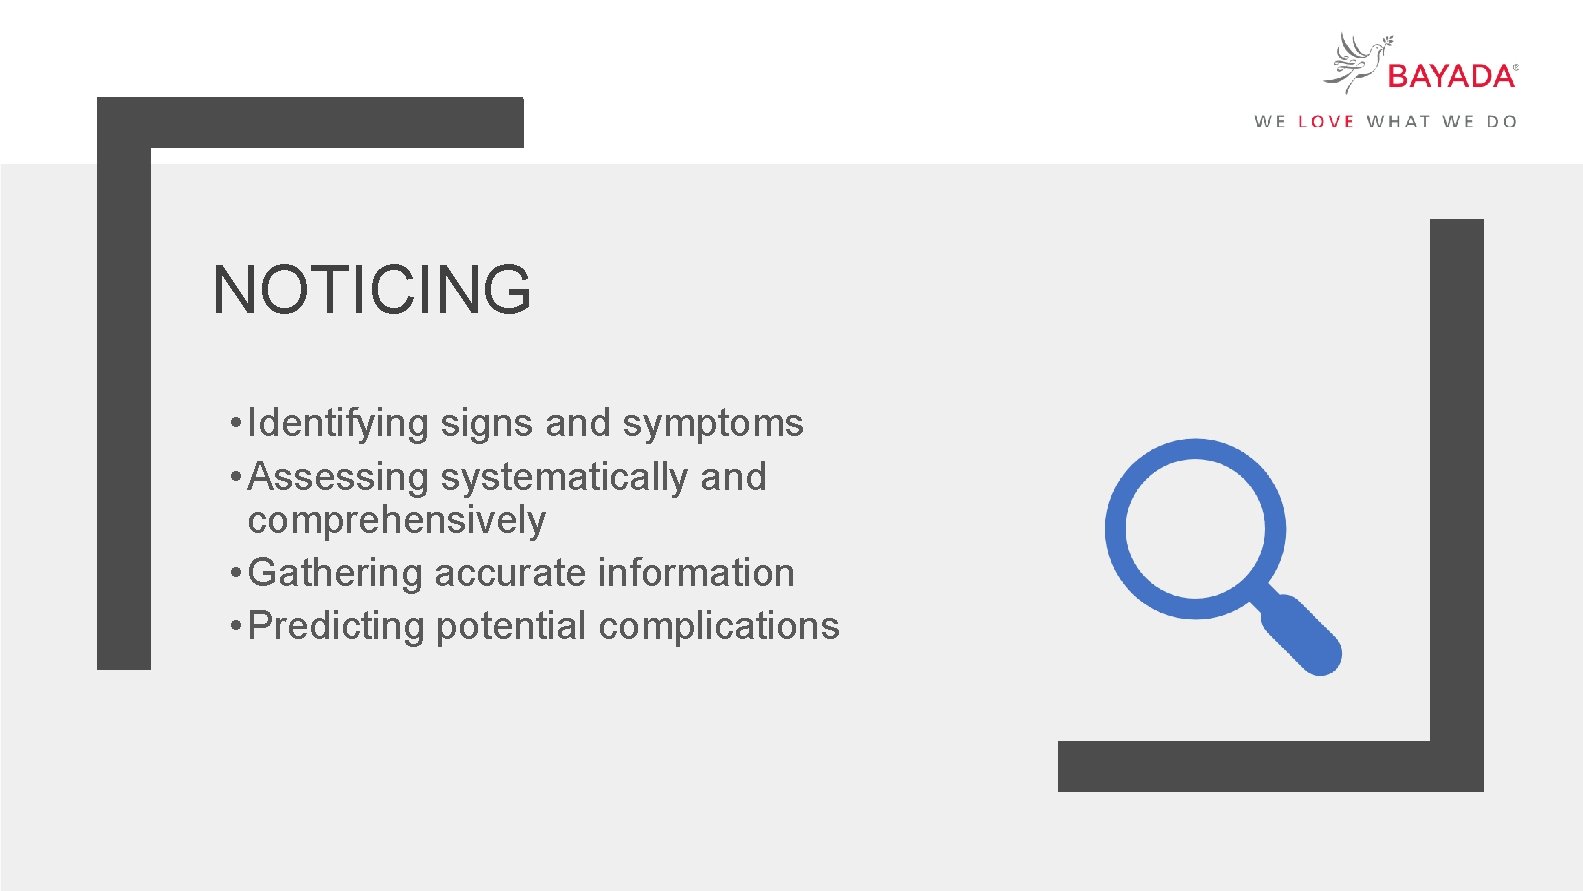 NOTICING • Identifying signs and symptoms • Assessing systematically and comprehensively • Gathering accurate